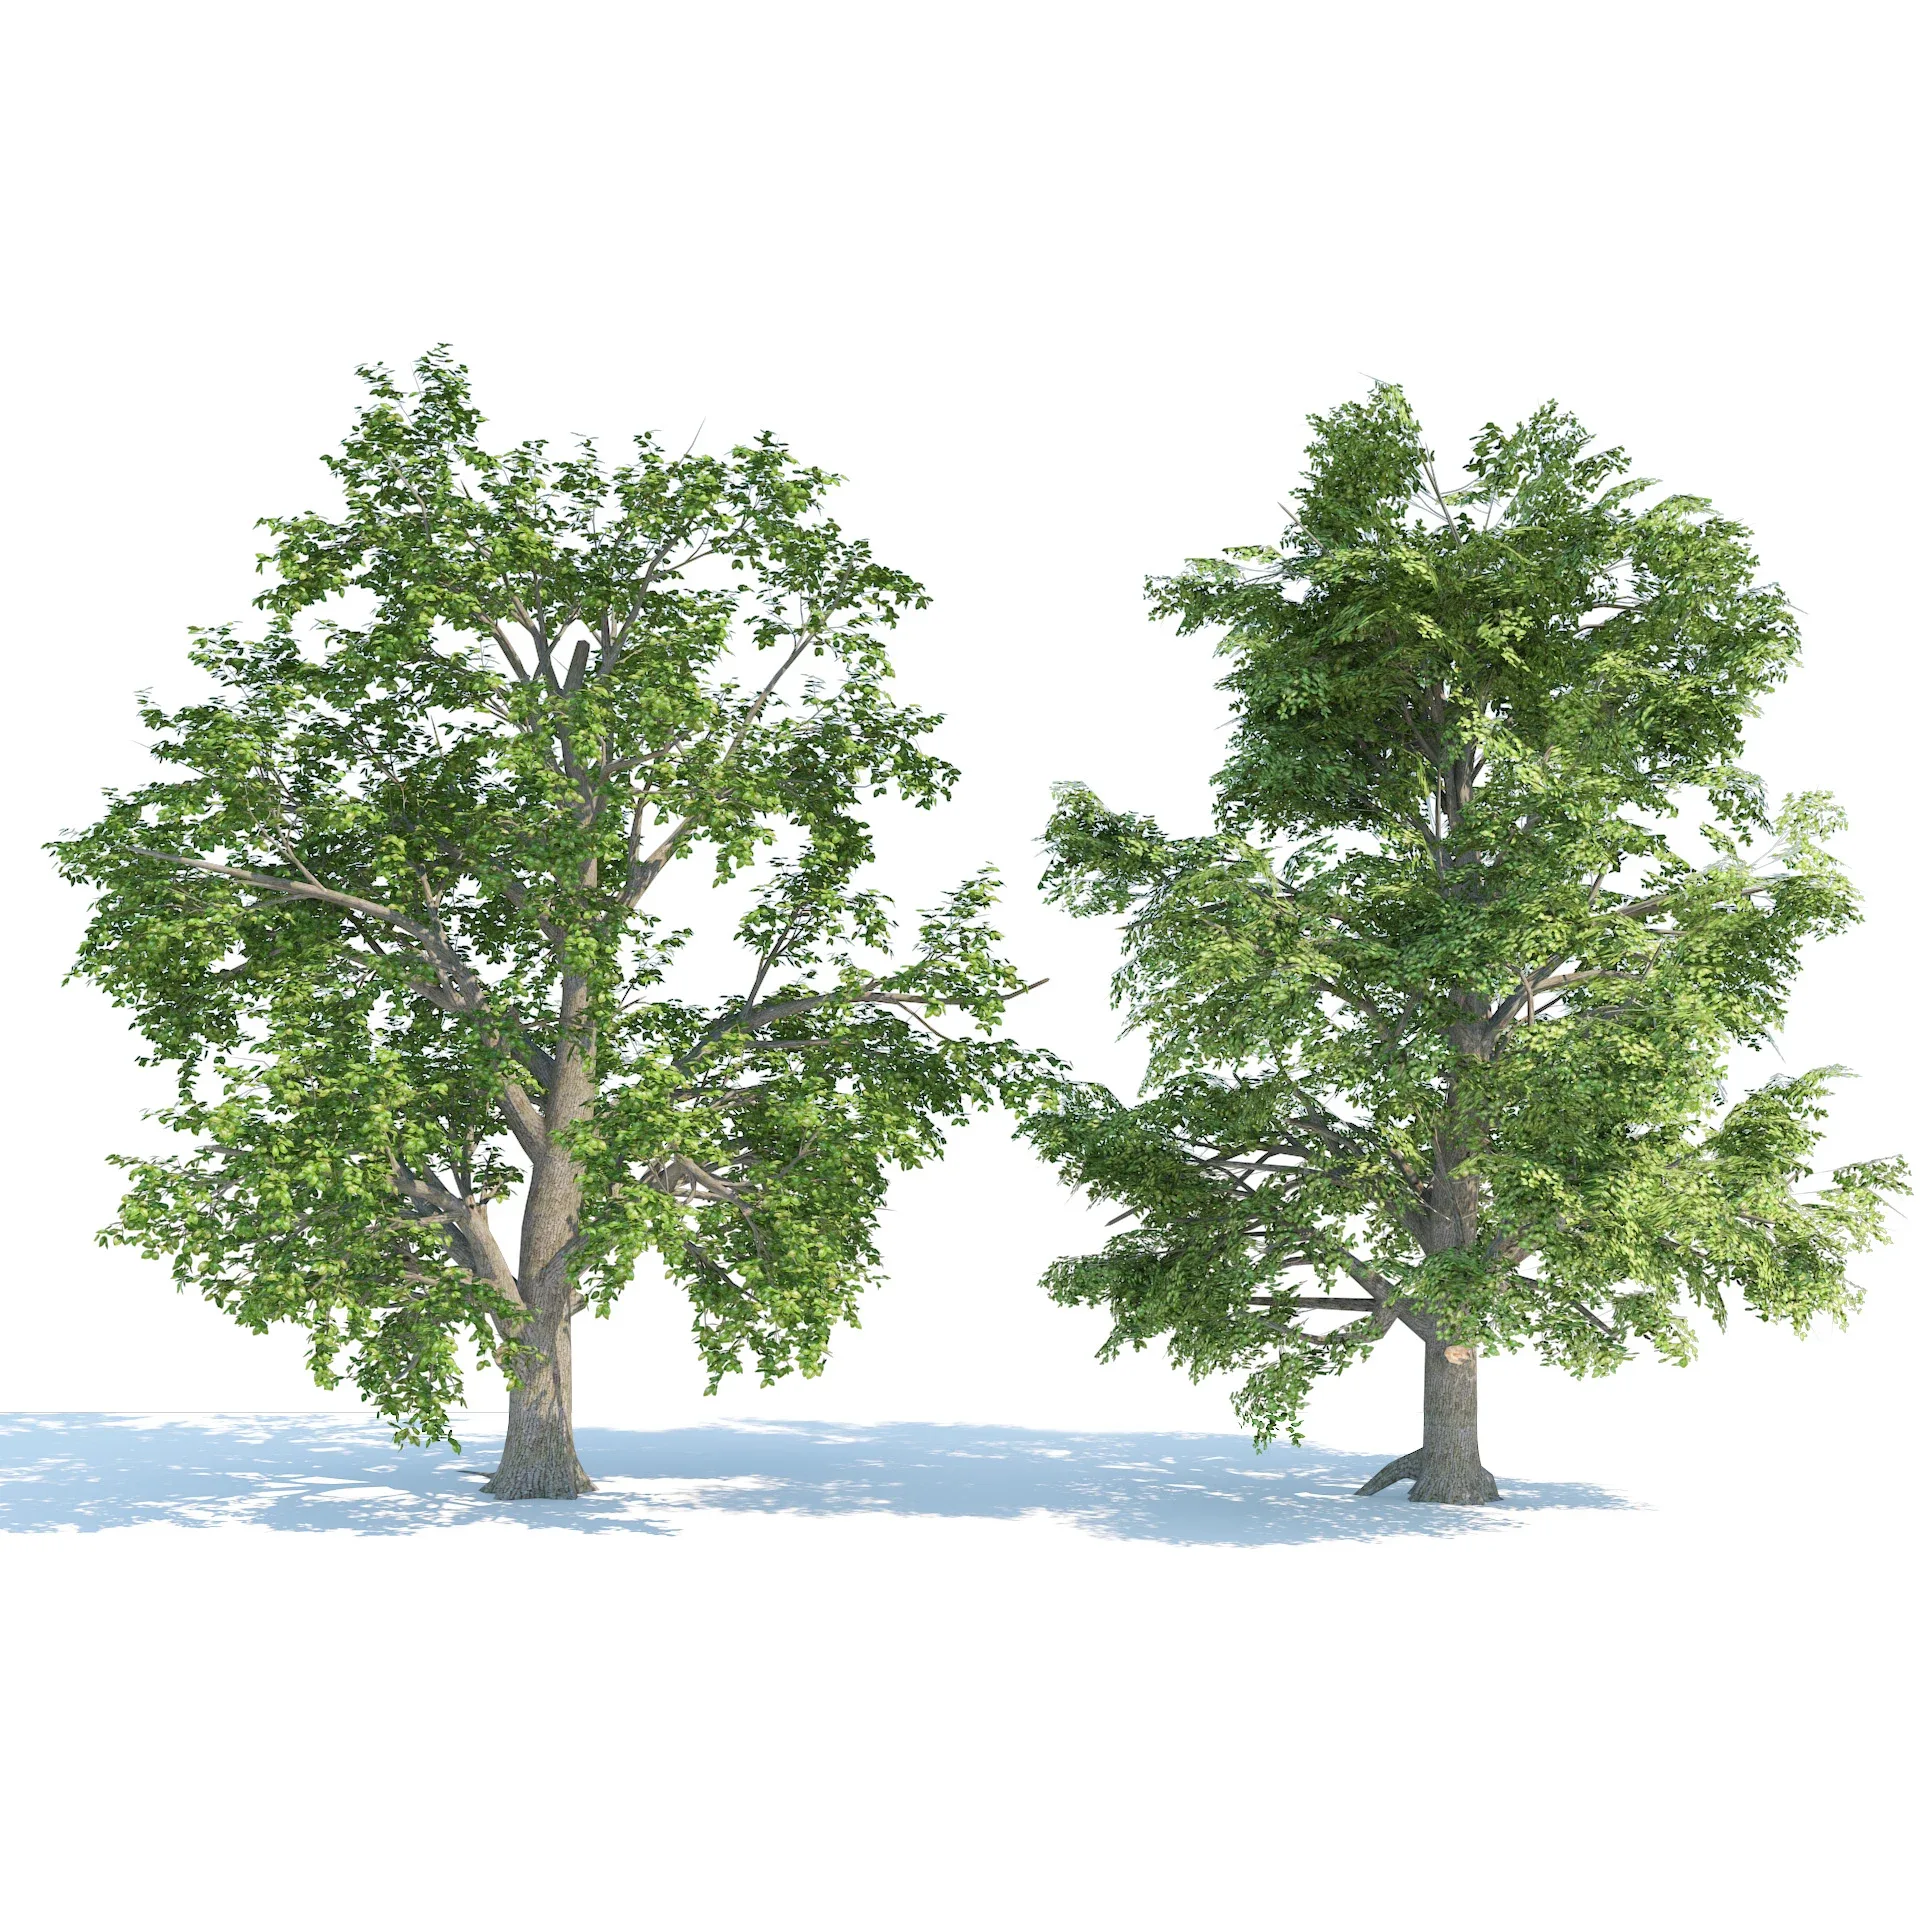 High and Low Poly Broadleaf Trees